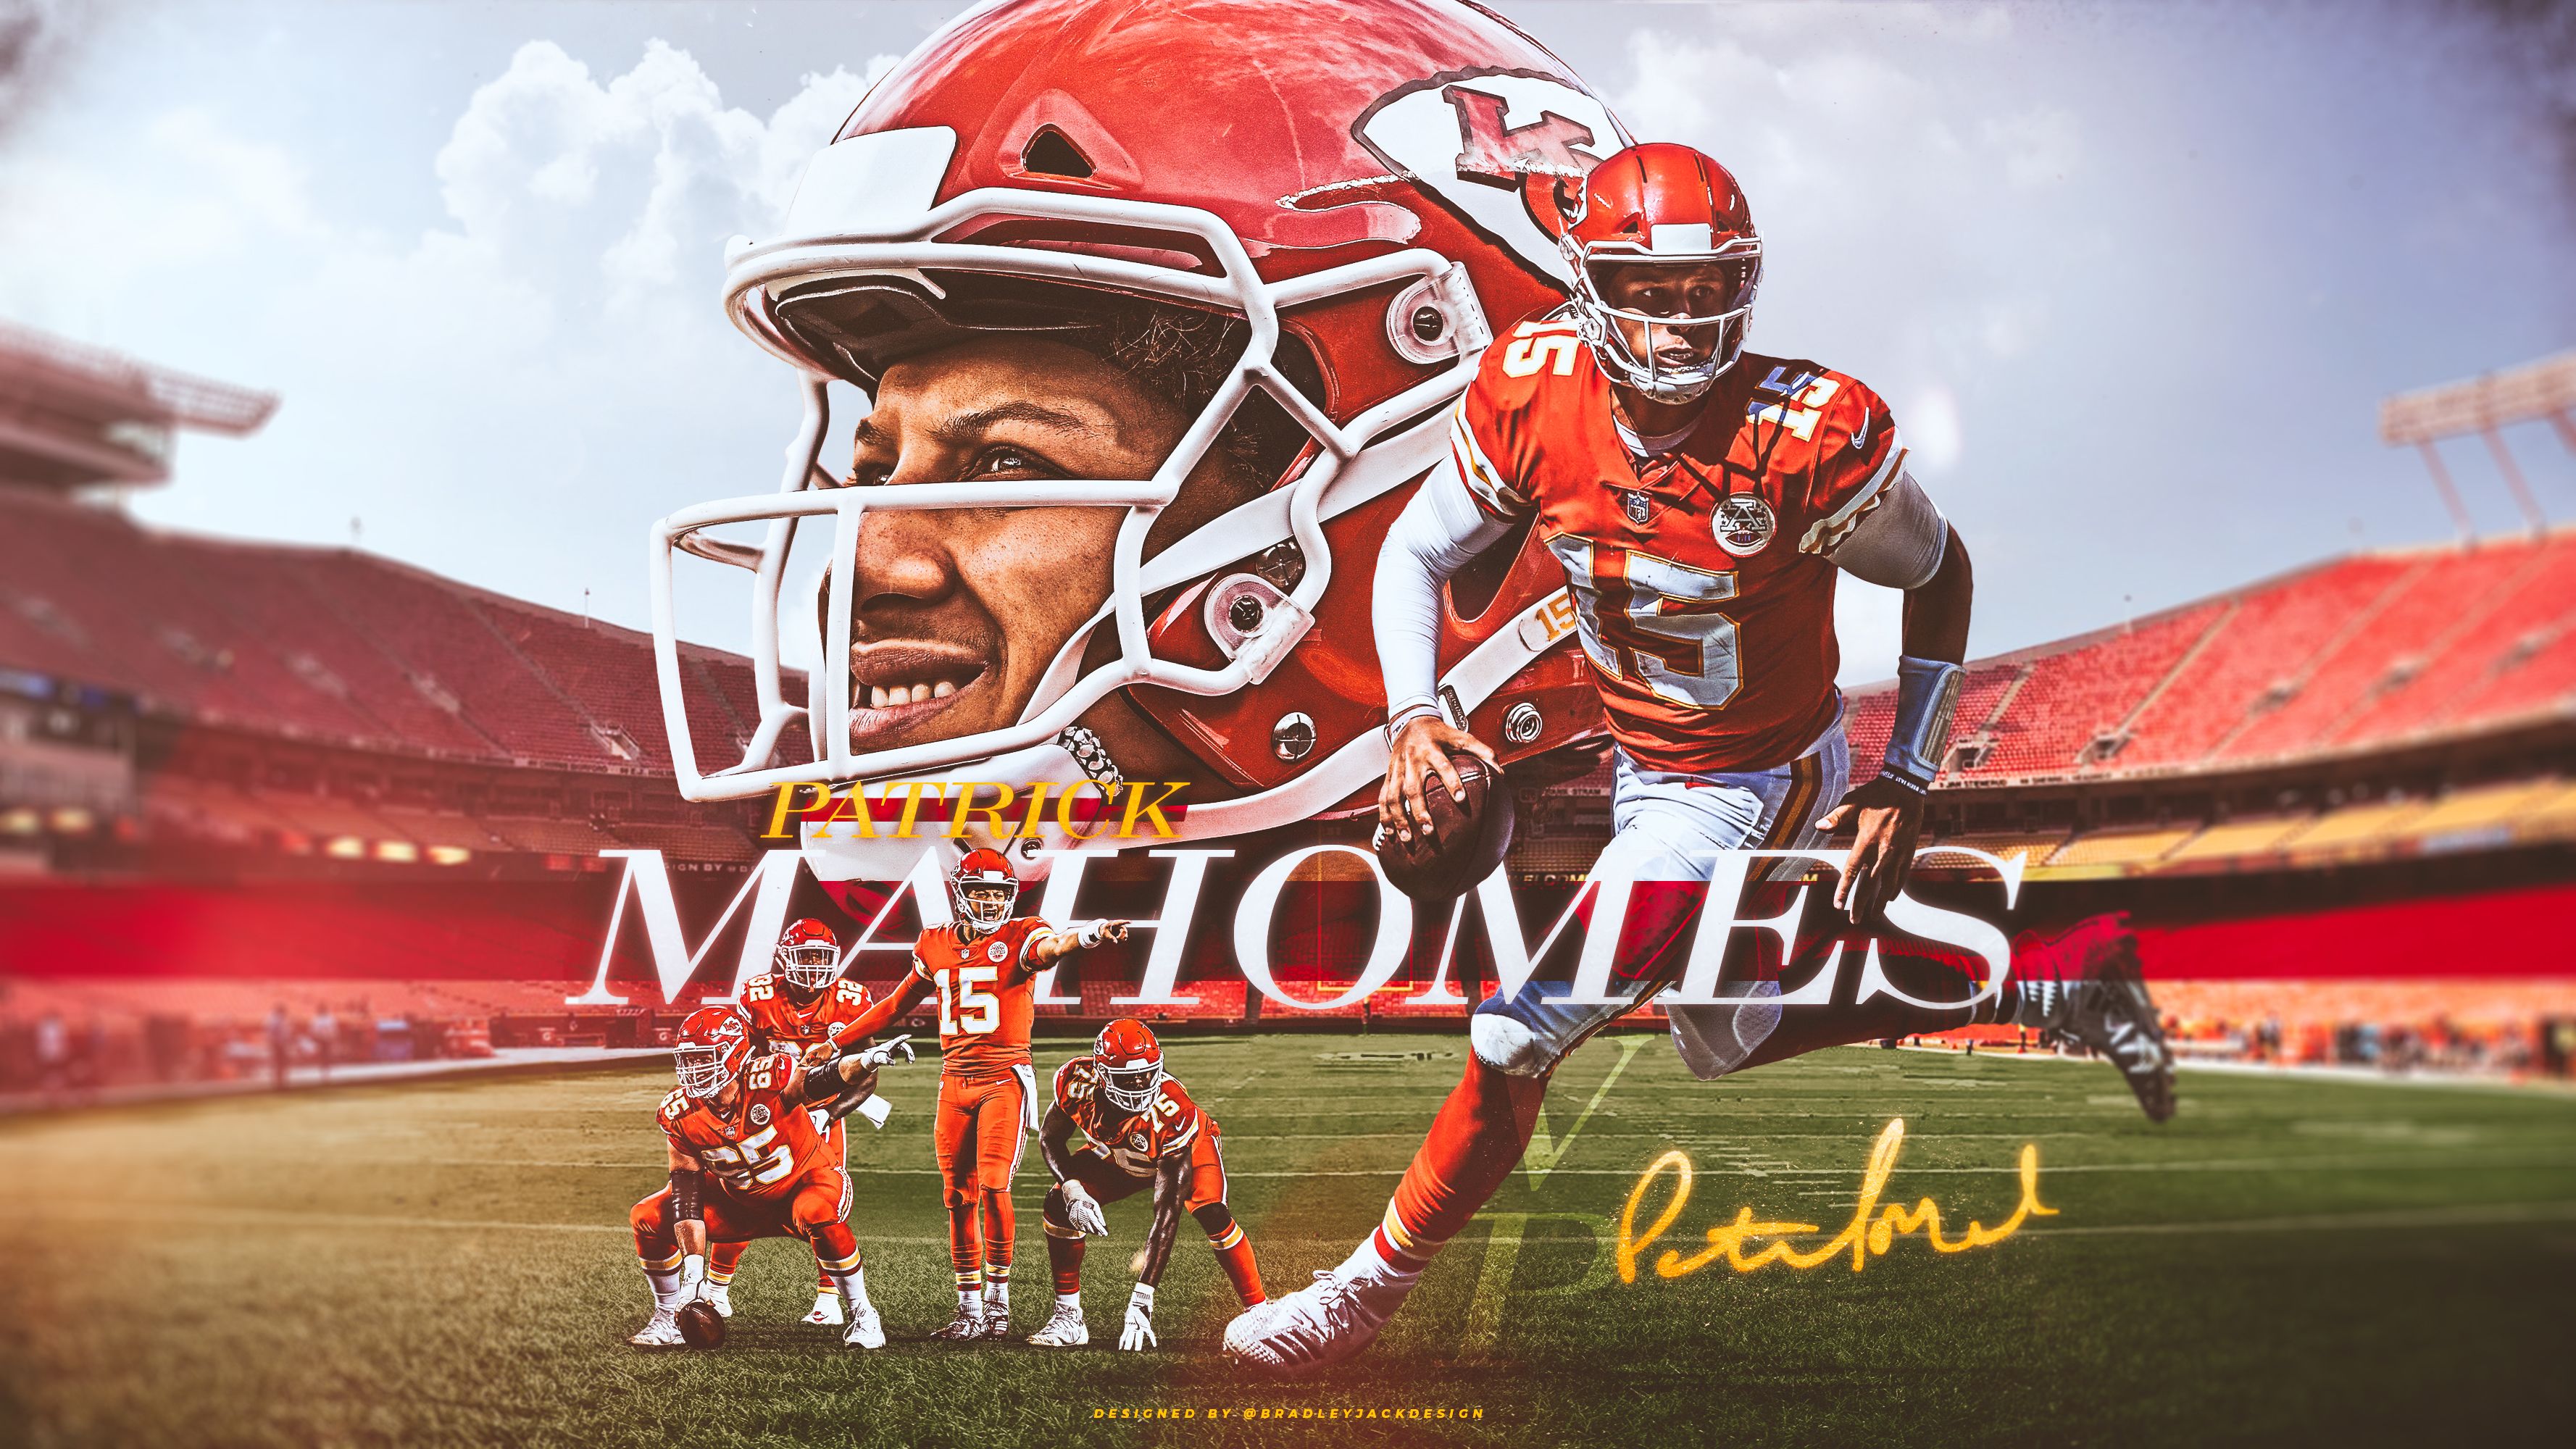 Patrick Mahomes Wallpaper Discover more background cool football iphone  wallpaper httpswwwnawpiccompatr  Football helmets Football  wallpaper Wallpaper